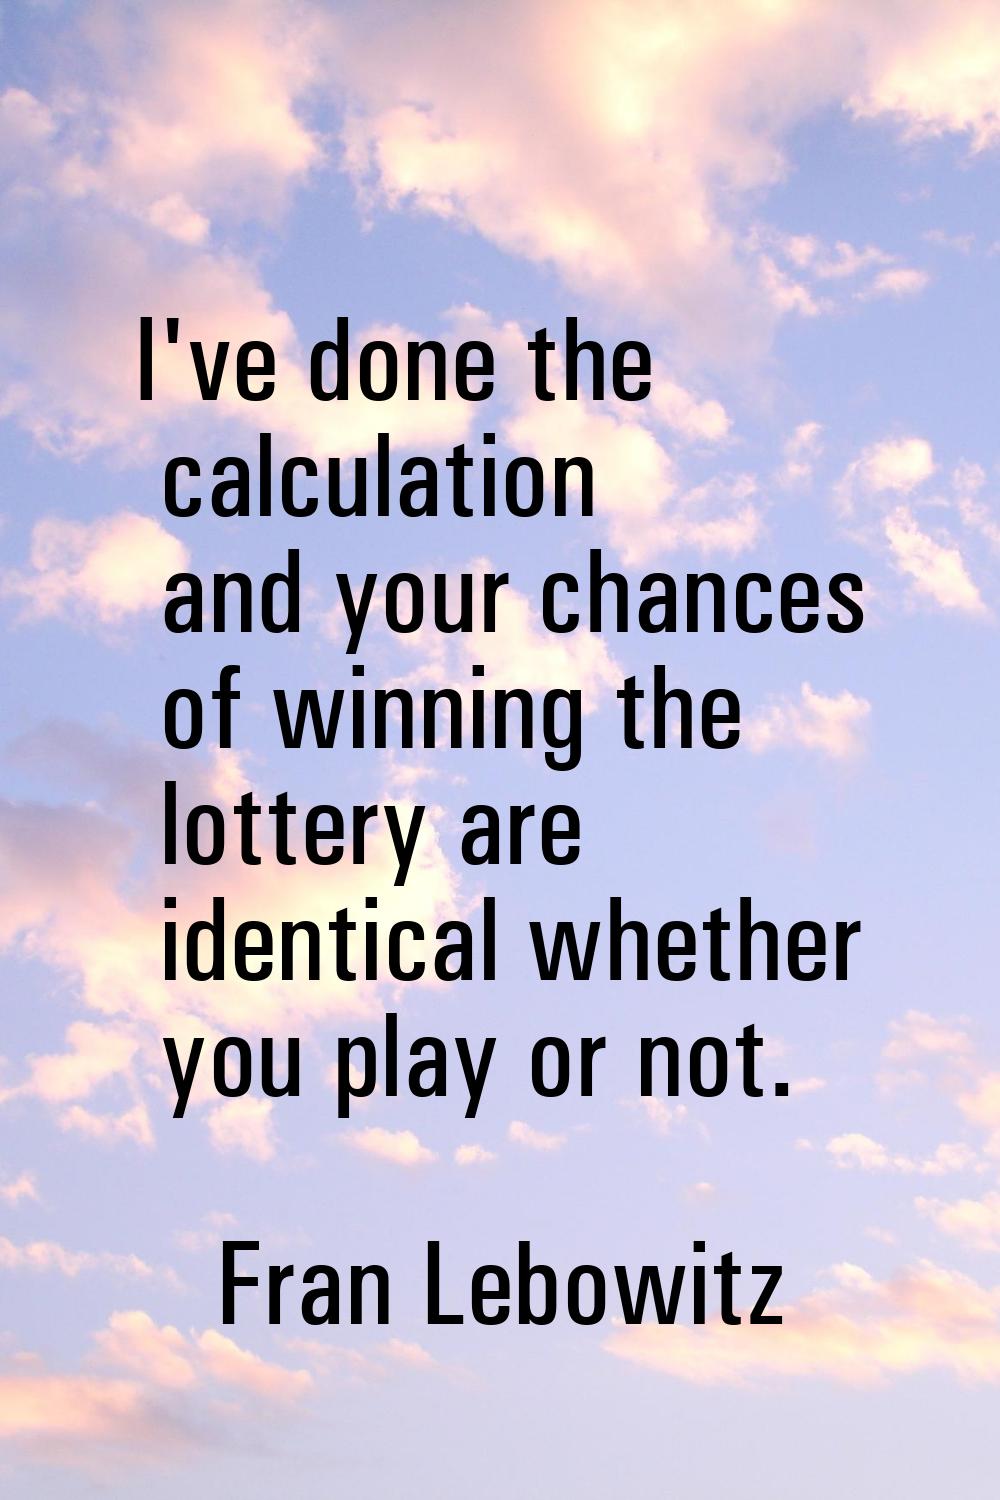 I've done the calculation and your chances of winning the lottery are identical whether you play or